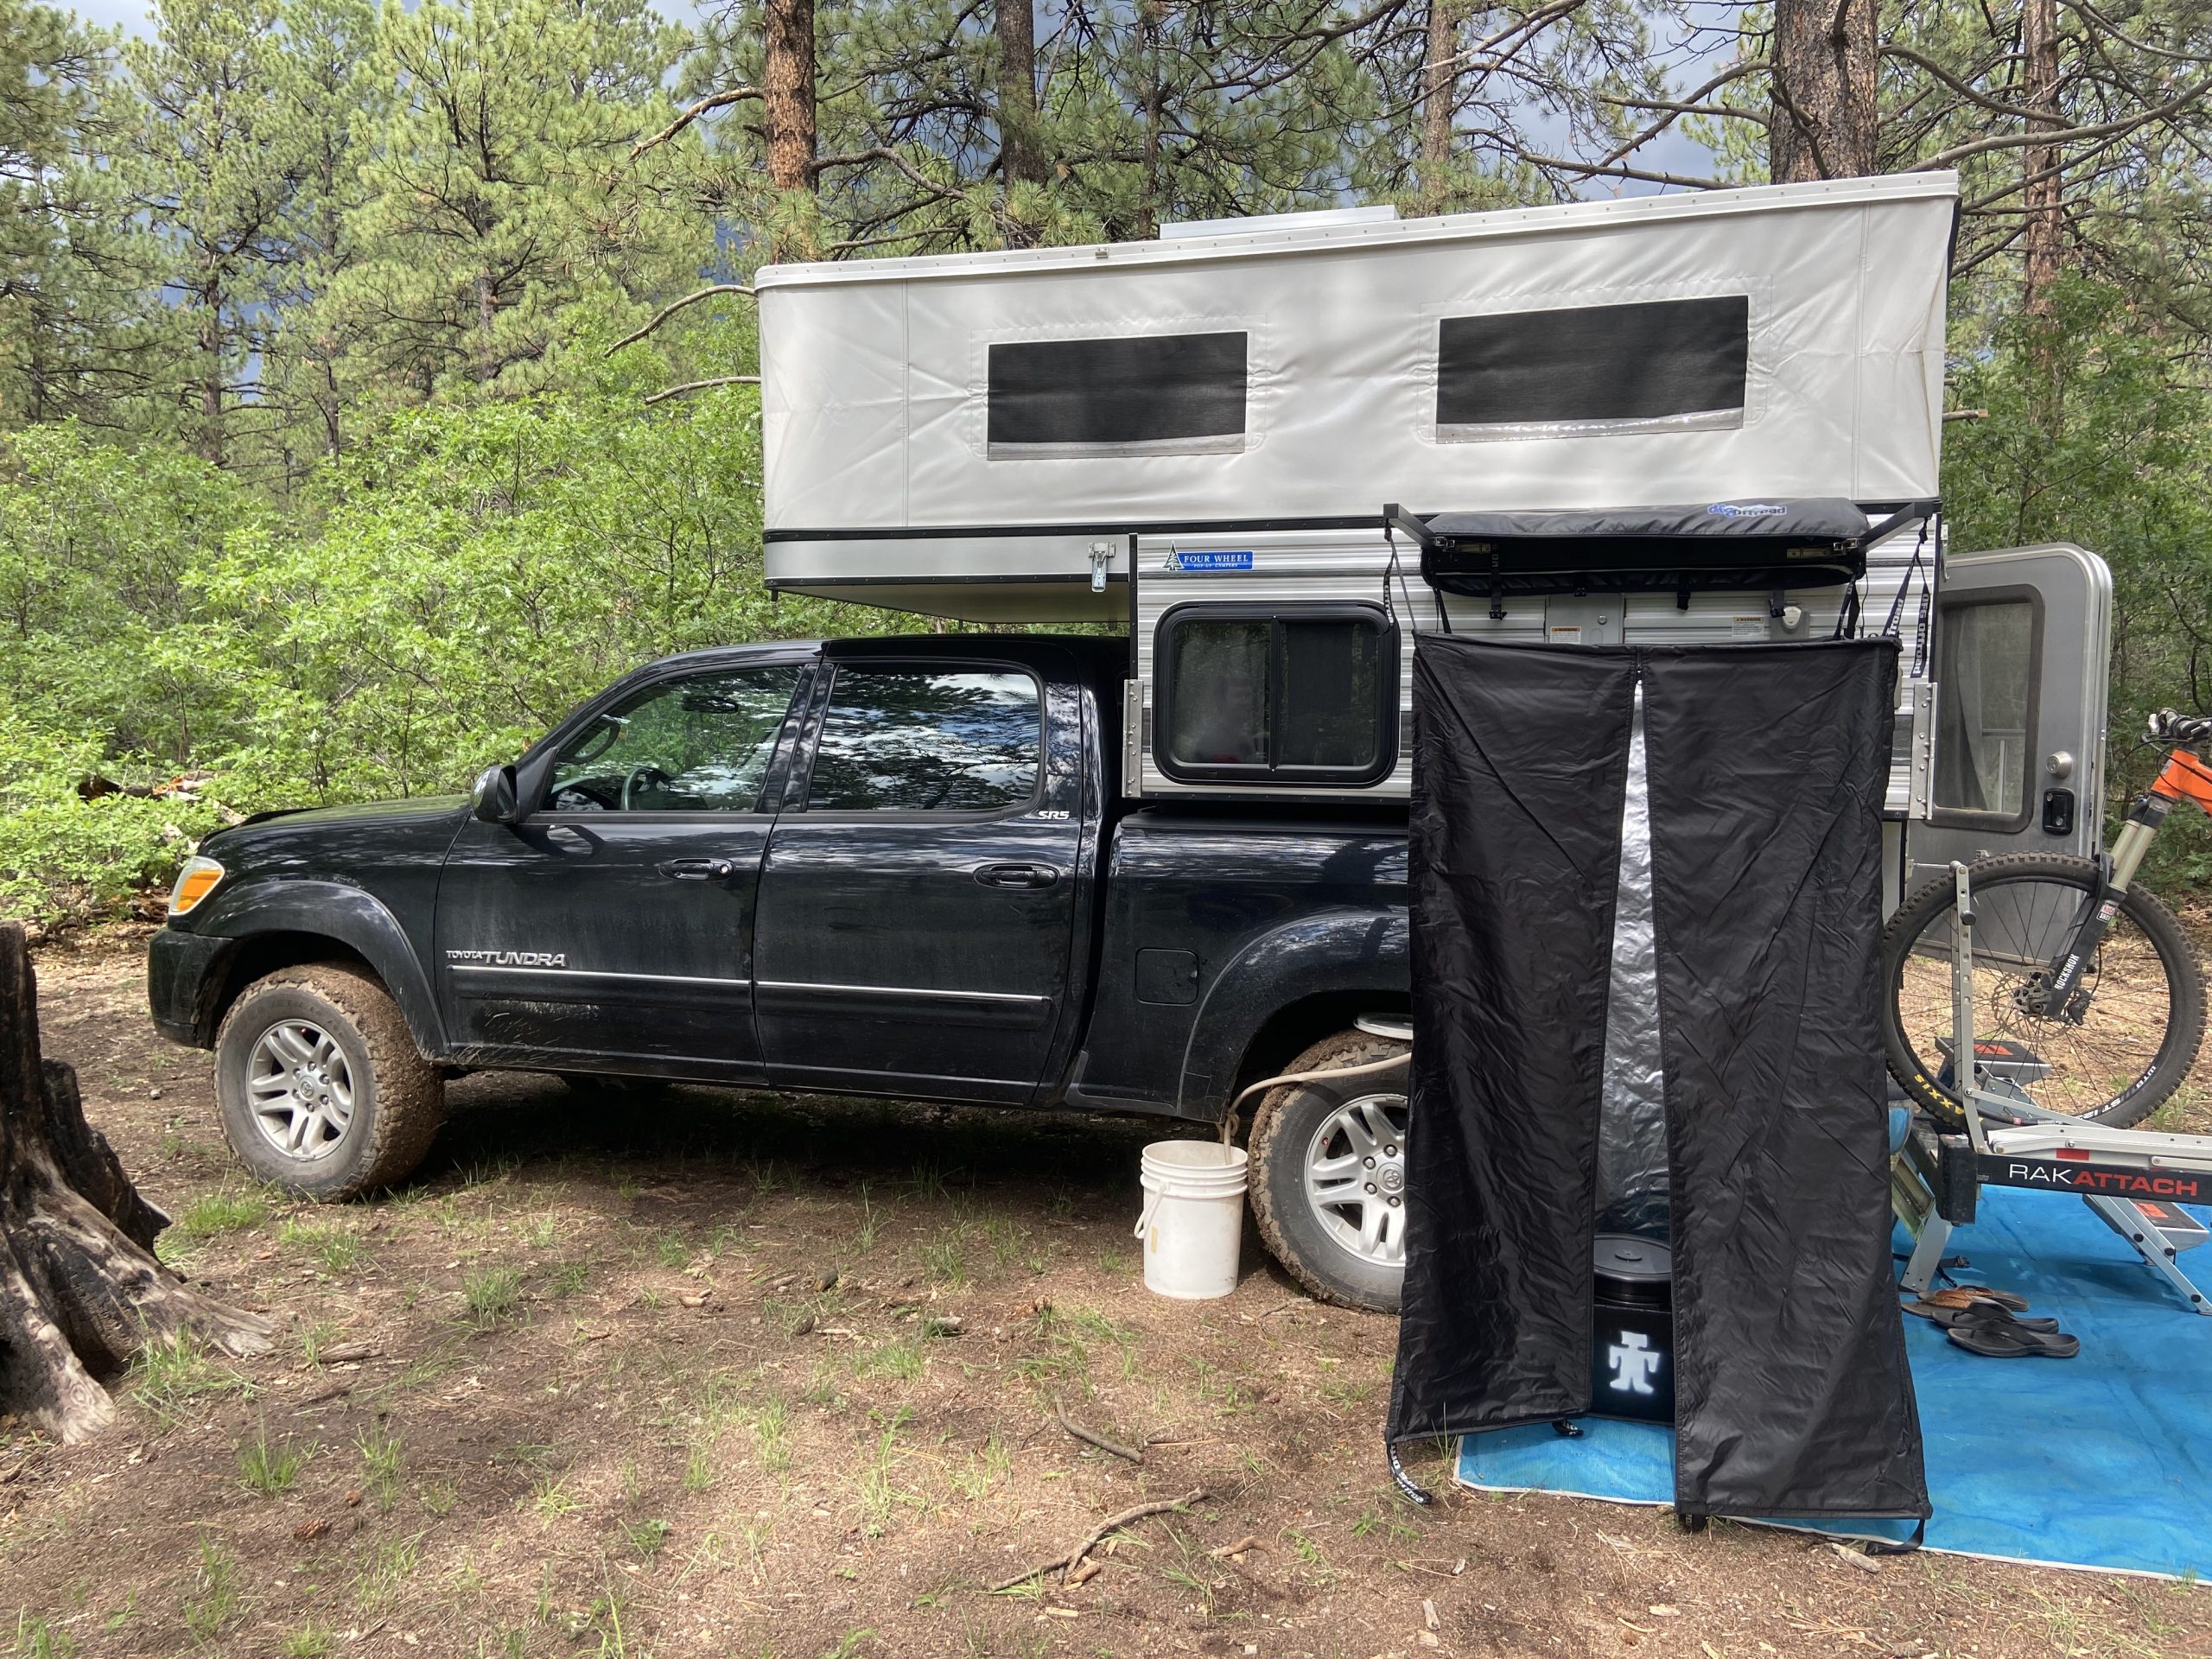 Black wolf shower tent groover moab advnture rigs dolores boggy draw